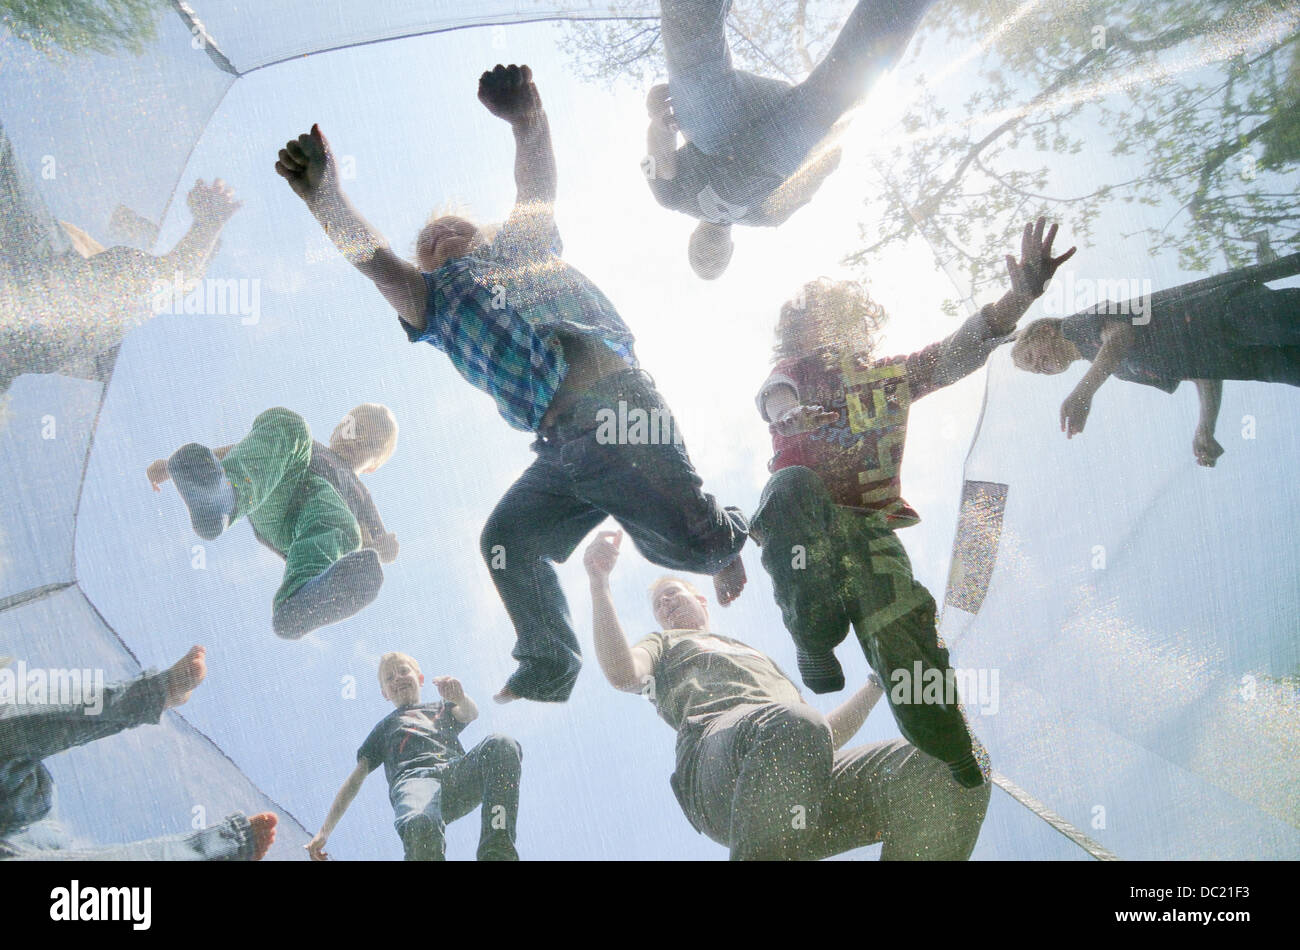 Mature men and boys jumping on trampoline, low angle view Stock Photo